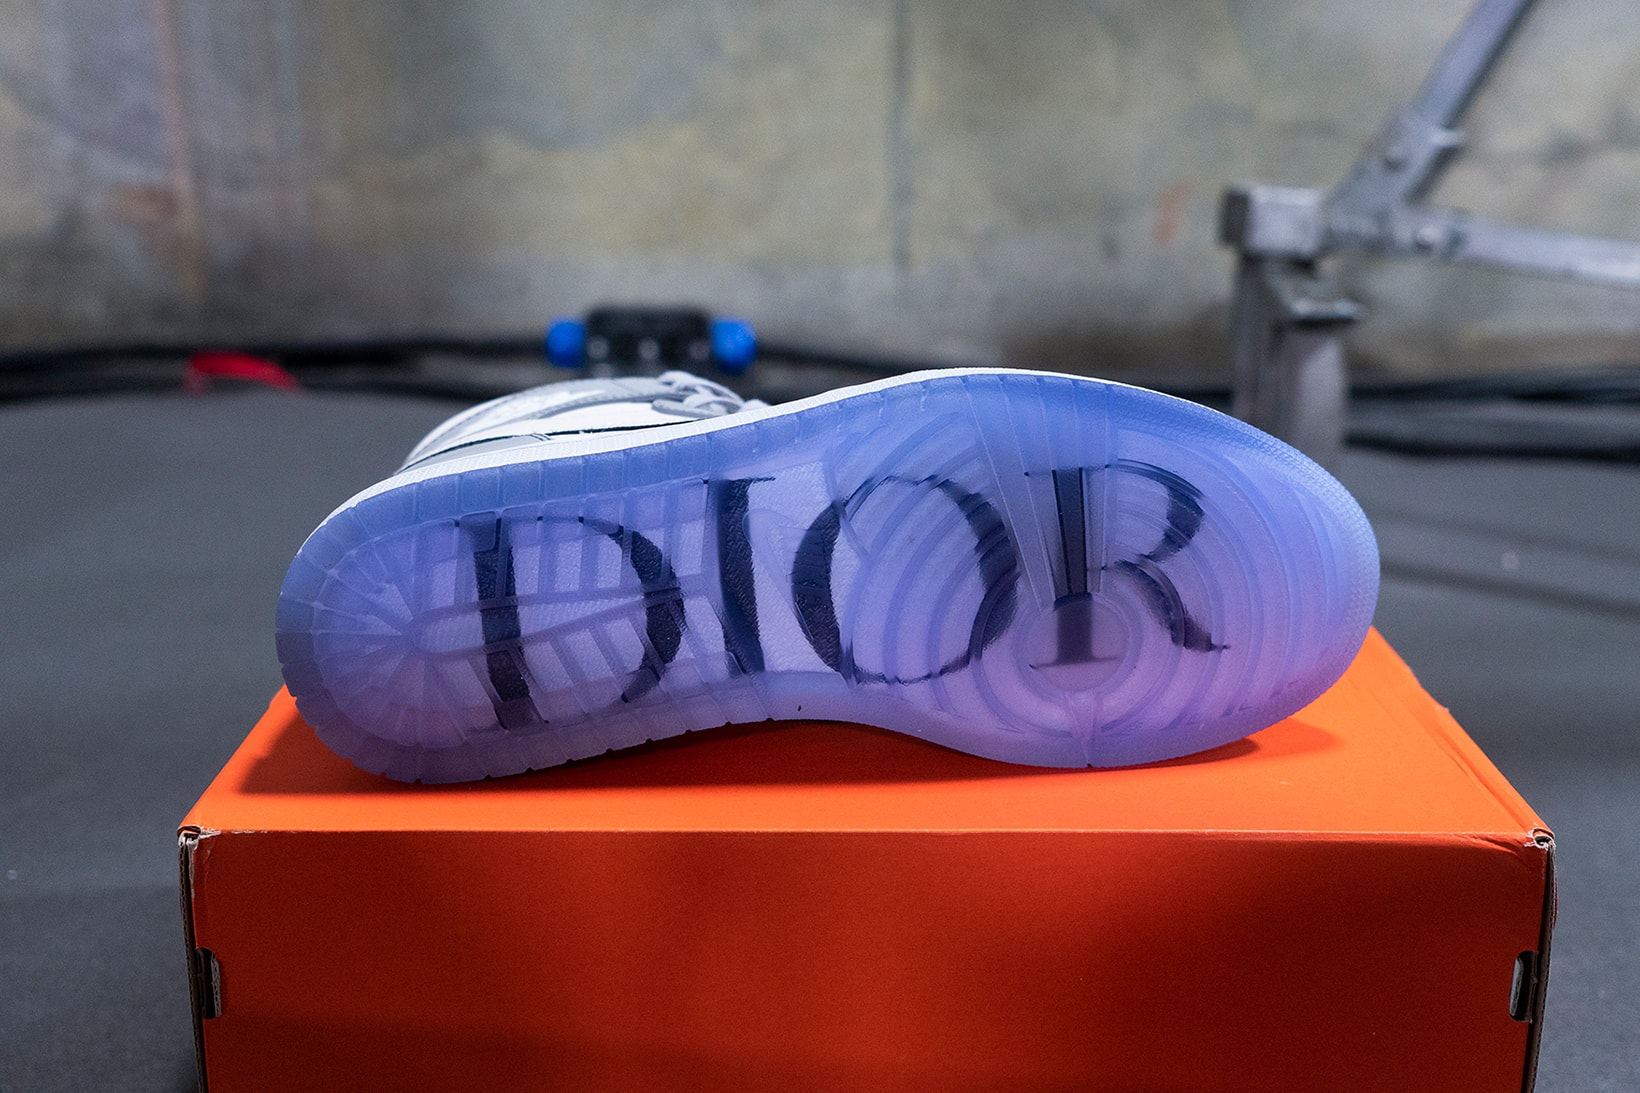 Dior and Jordan Debut Collaboration Sneakers at Pre-fall 2020 Show